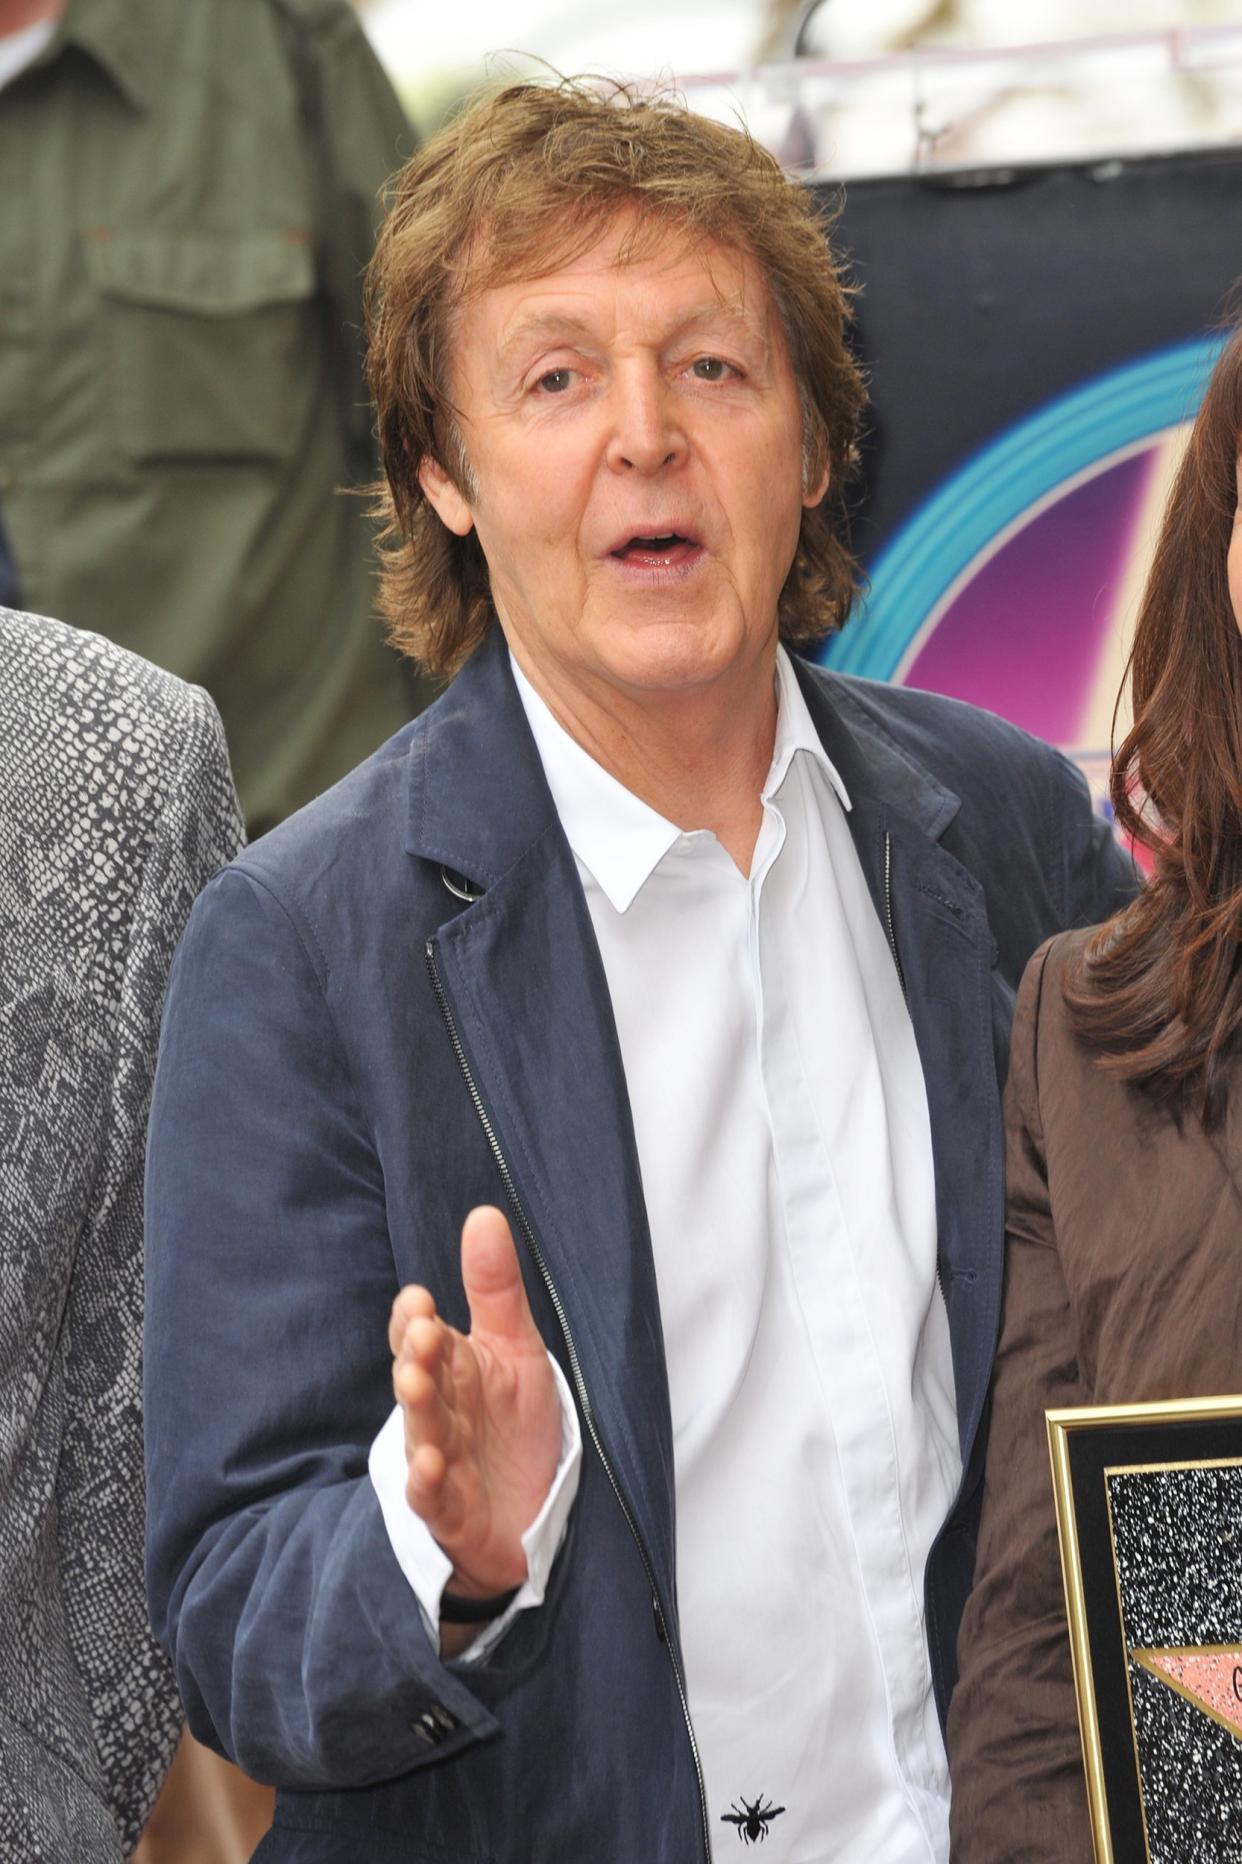 Paul McCartney at Hollywood Walk of Fame star ceremony